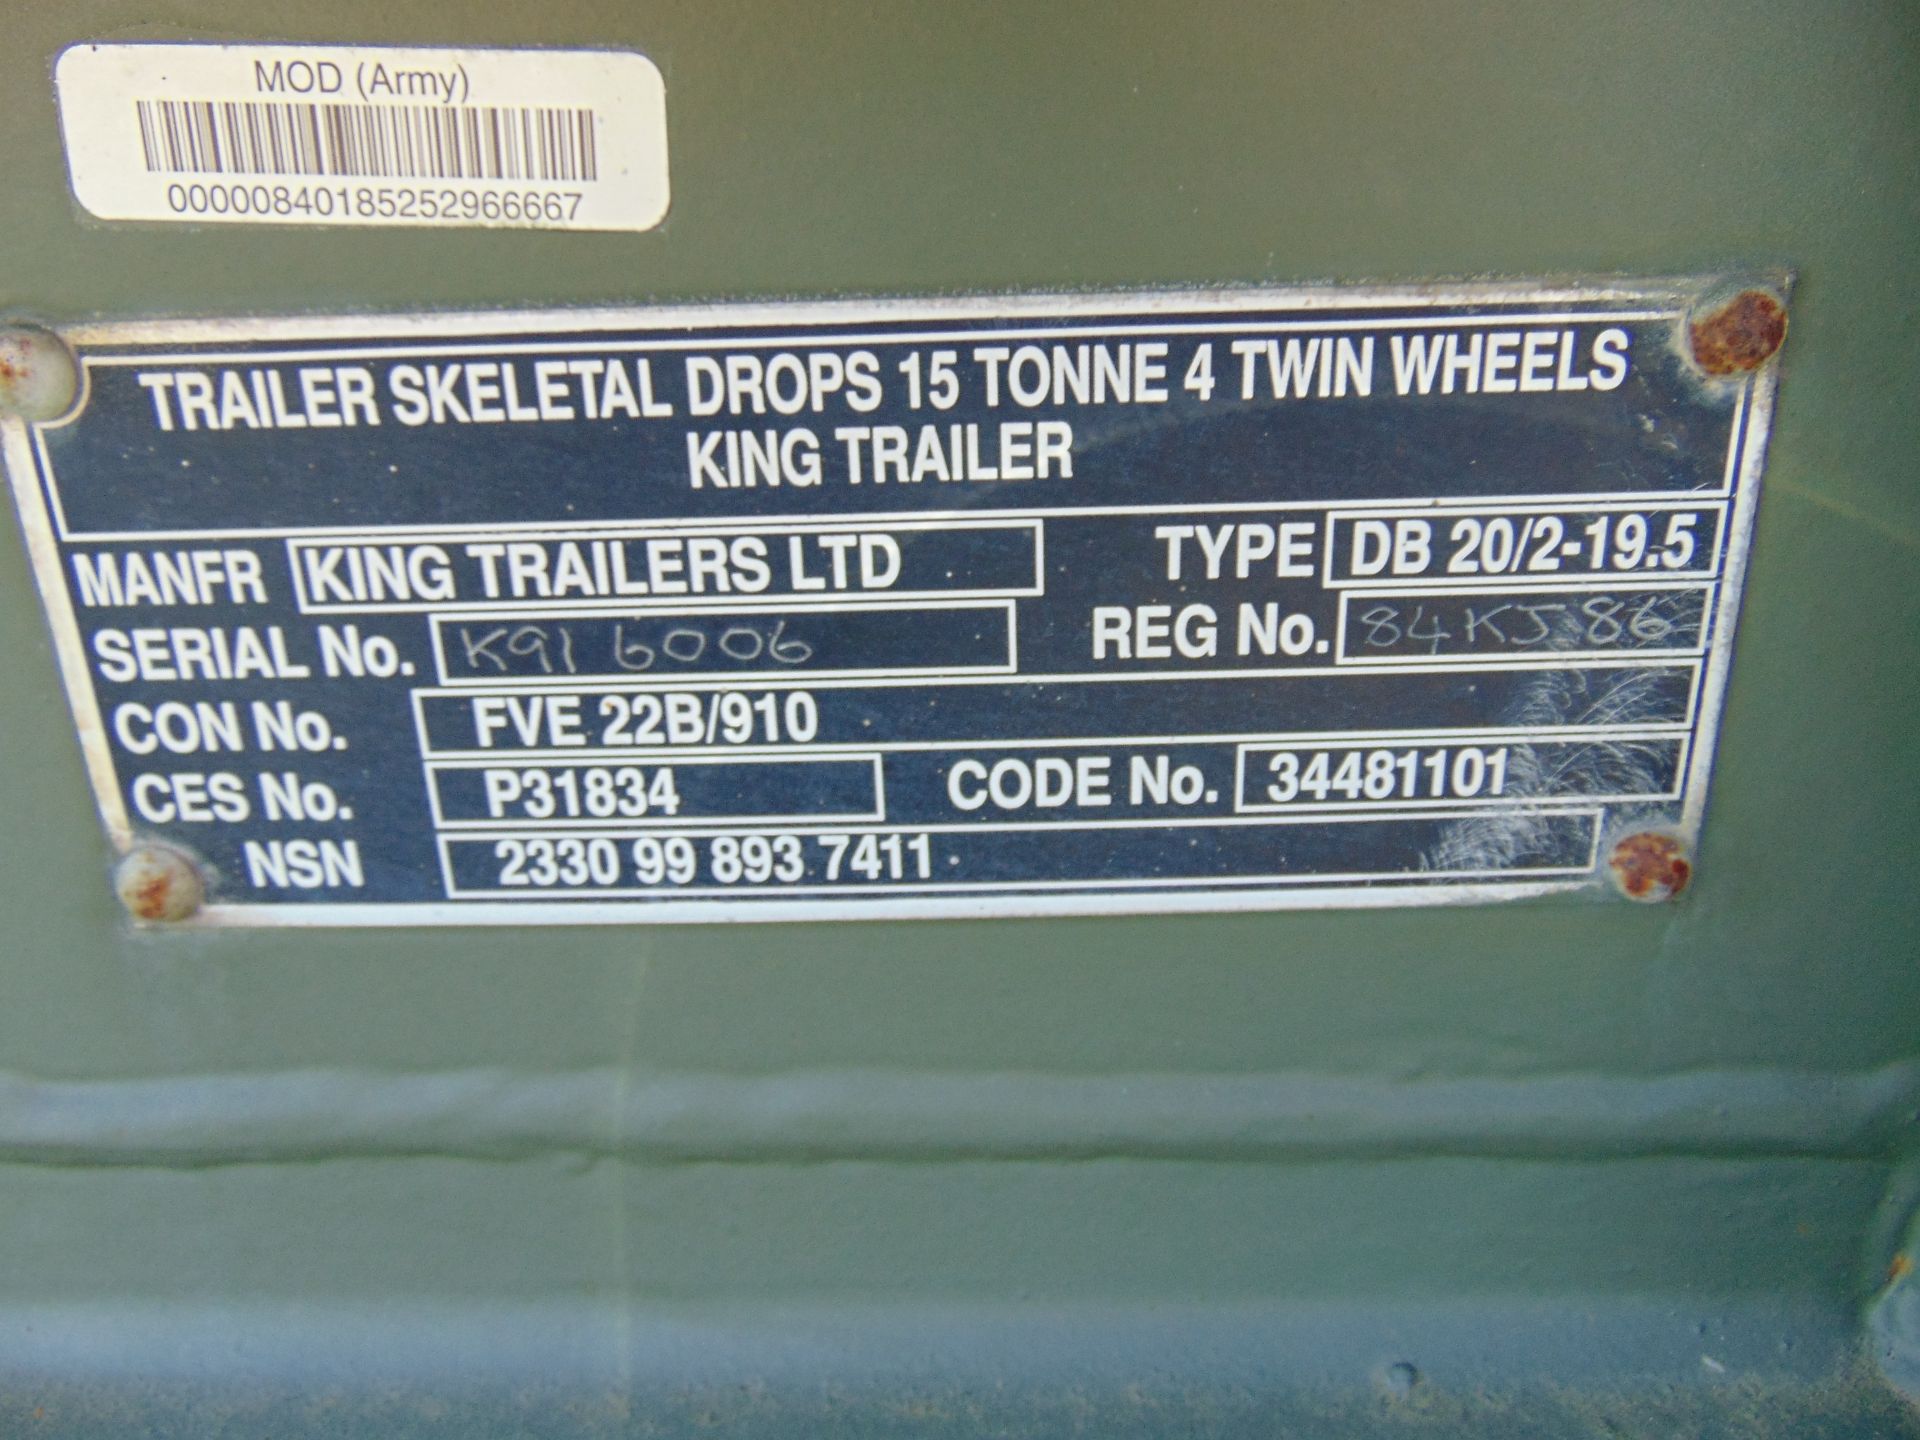 Ex Reserve King DB 2 Axle 15 Tonne Skeletal drops/skip/container Trailer complete with Twist Locks - Image 6 of 7